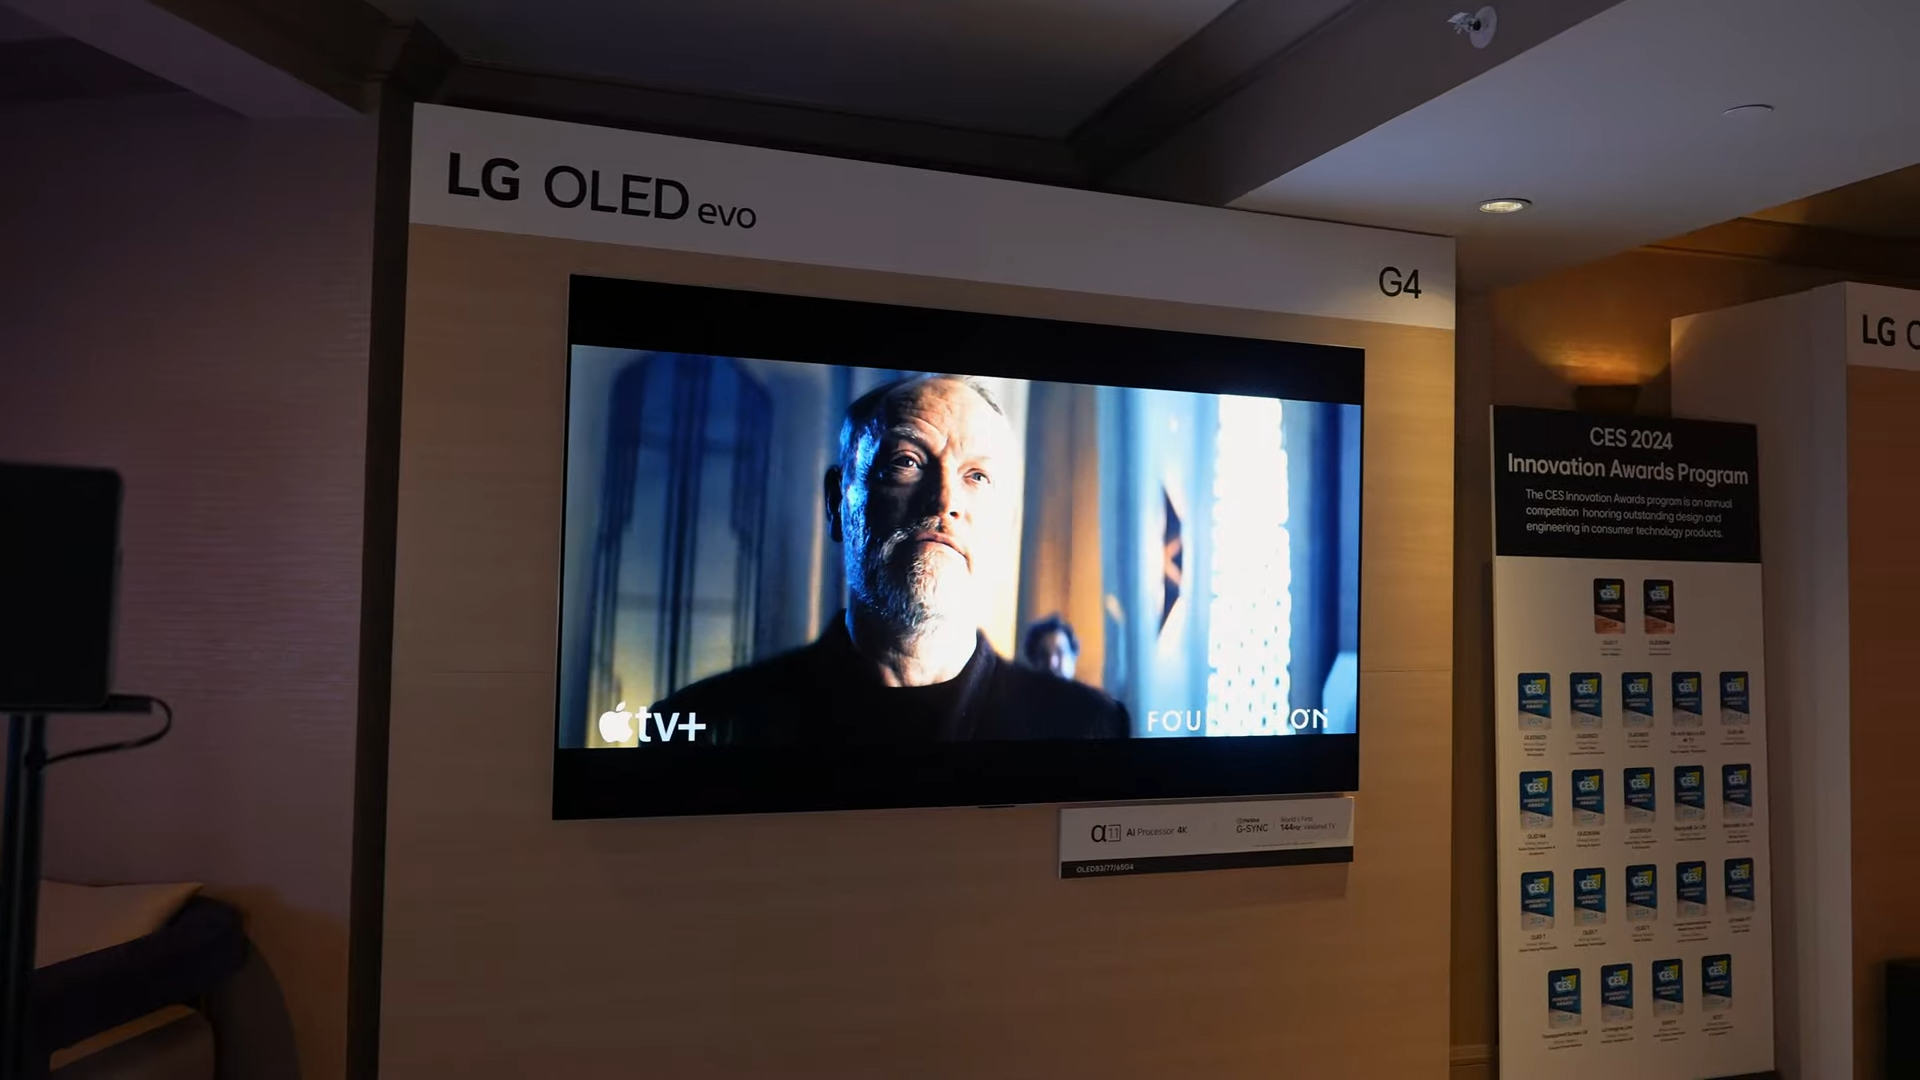 LG G4 OLED on display at CES 2024